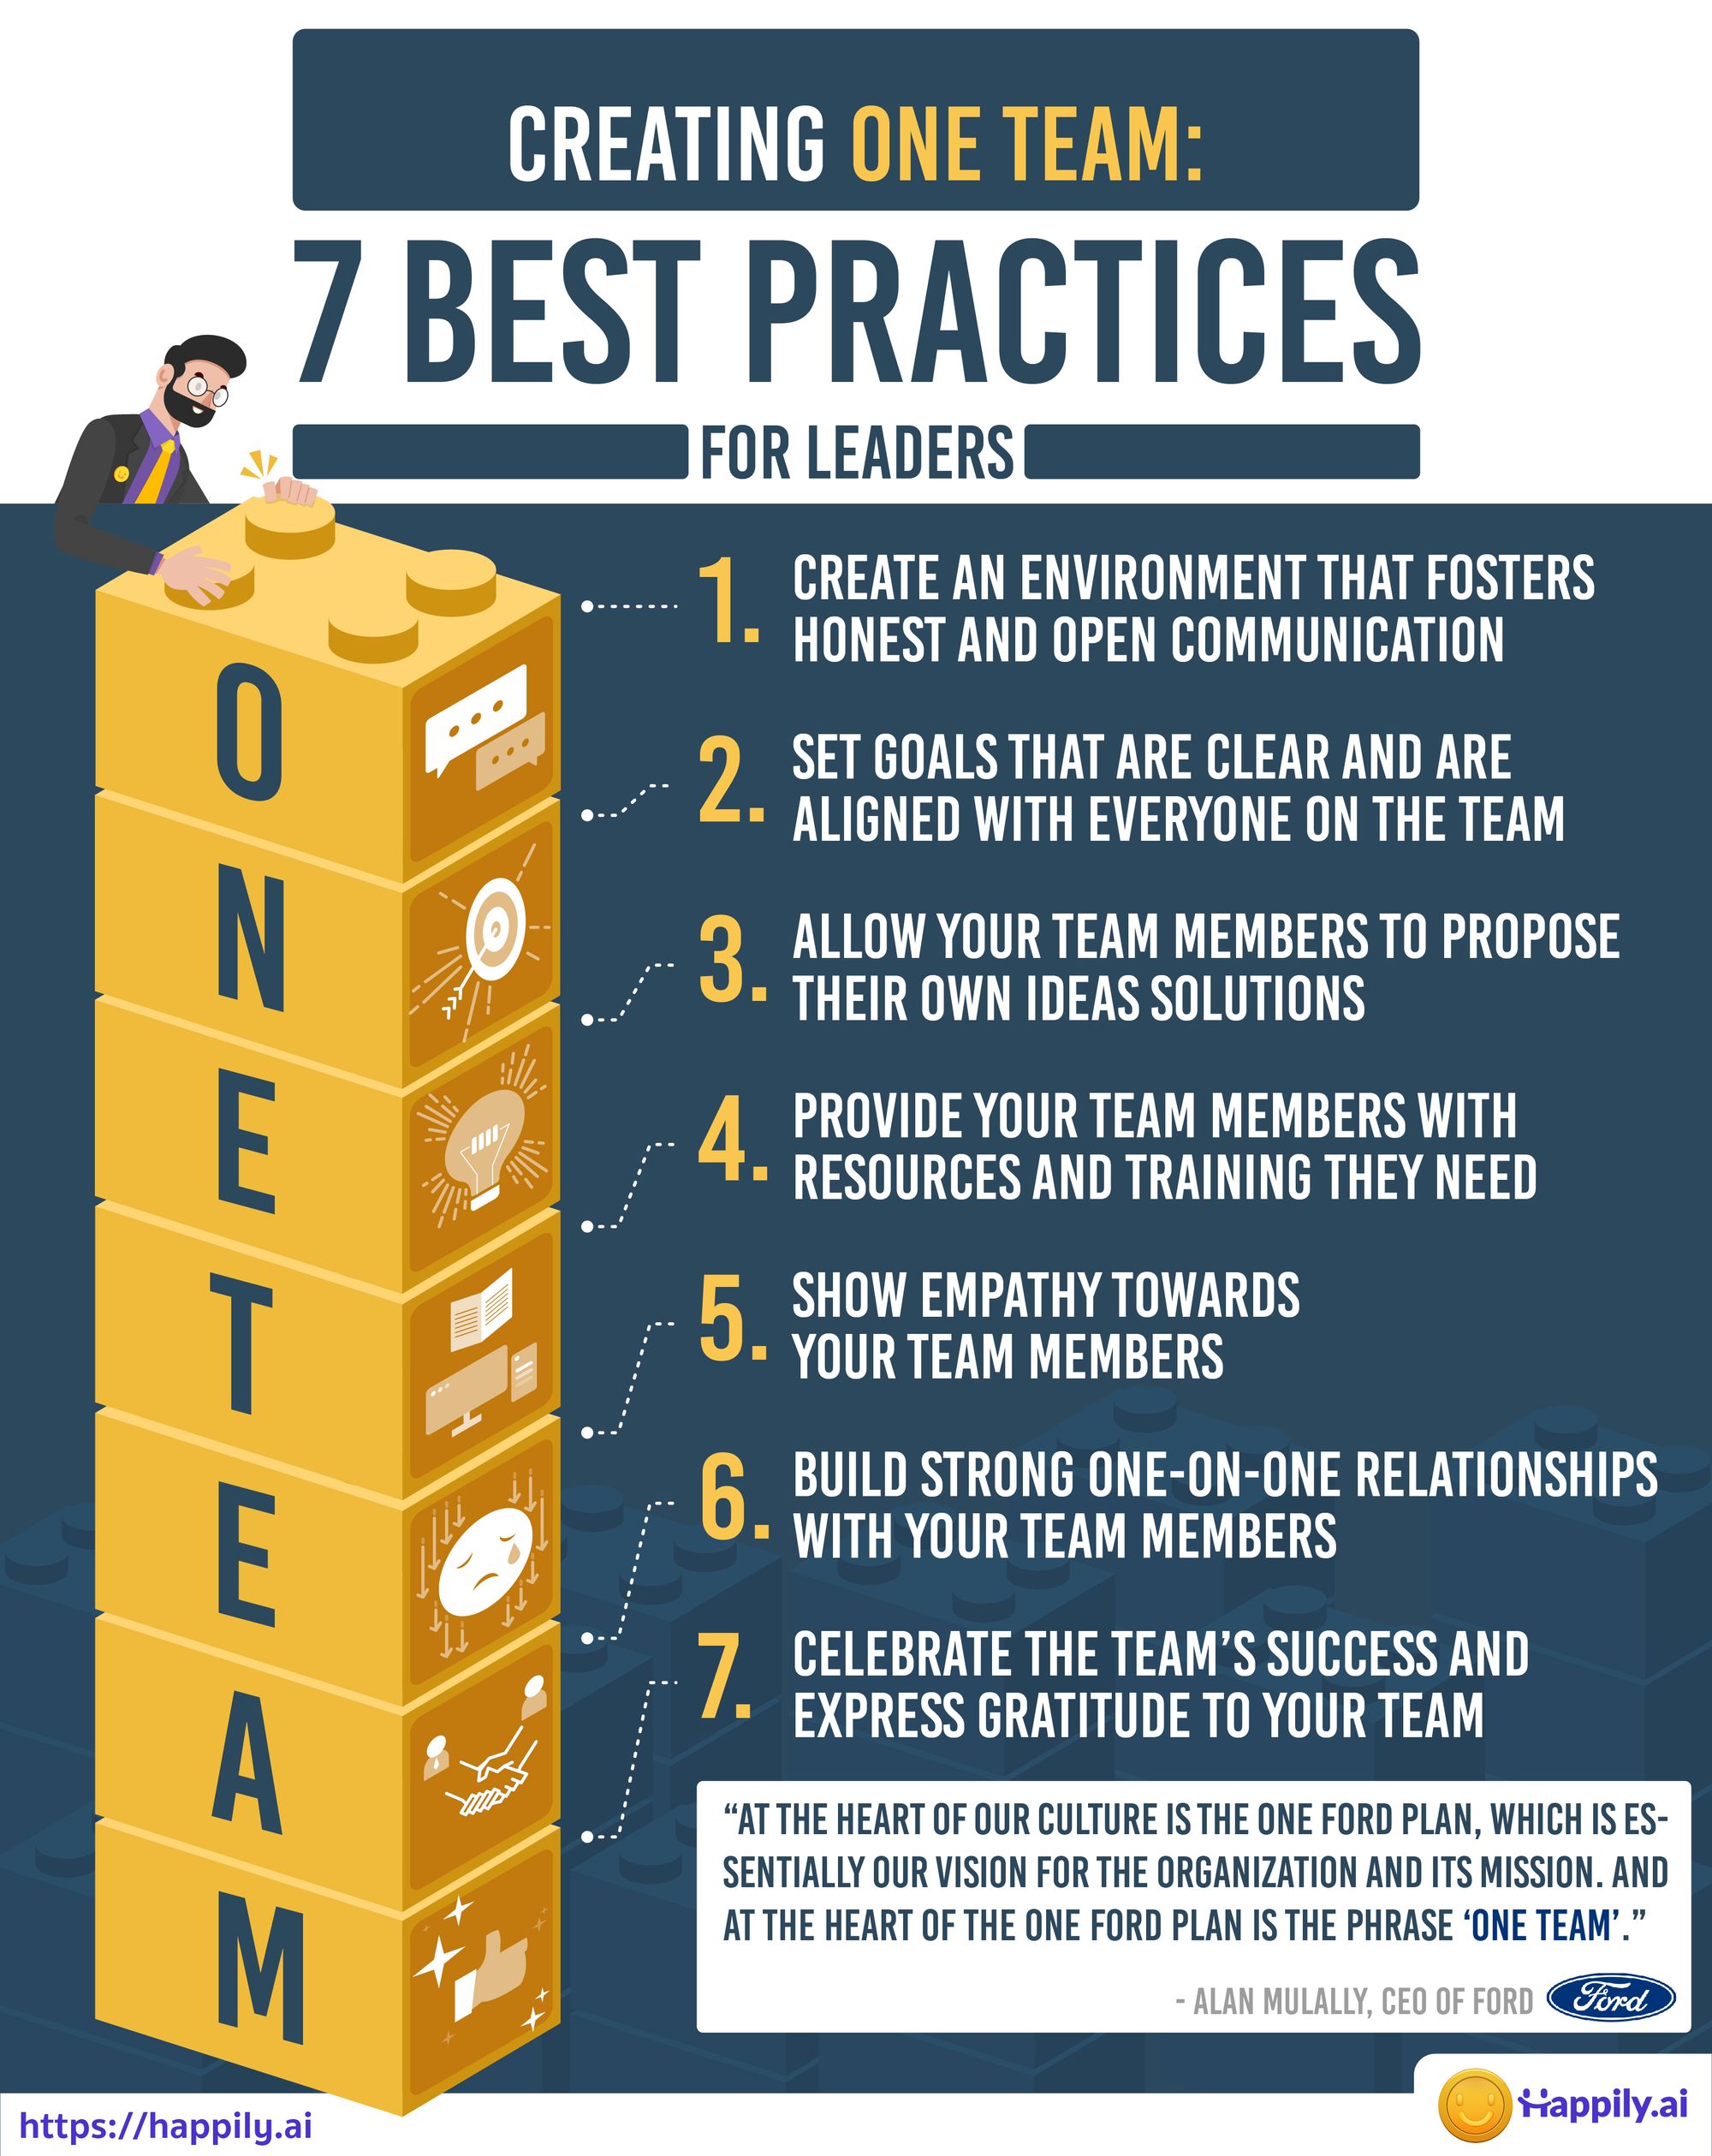 7 best practices for creating 'one team' for Leaders